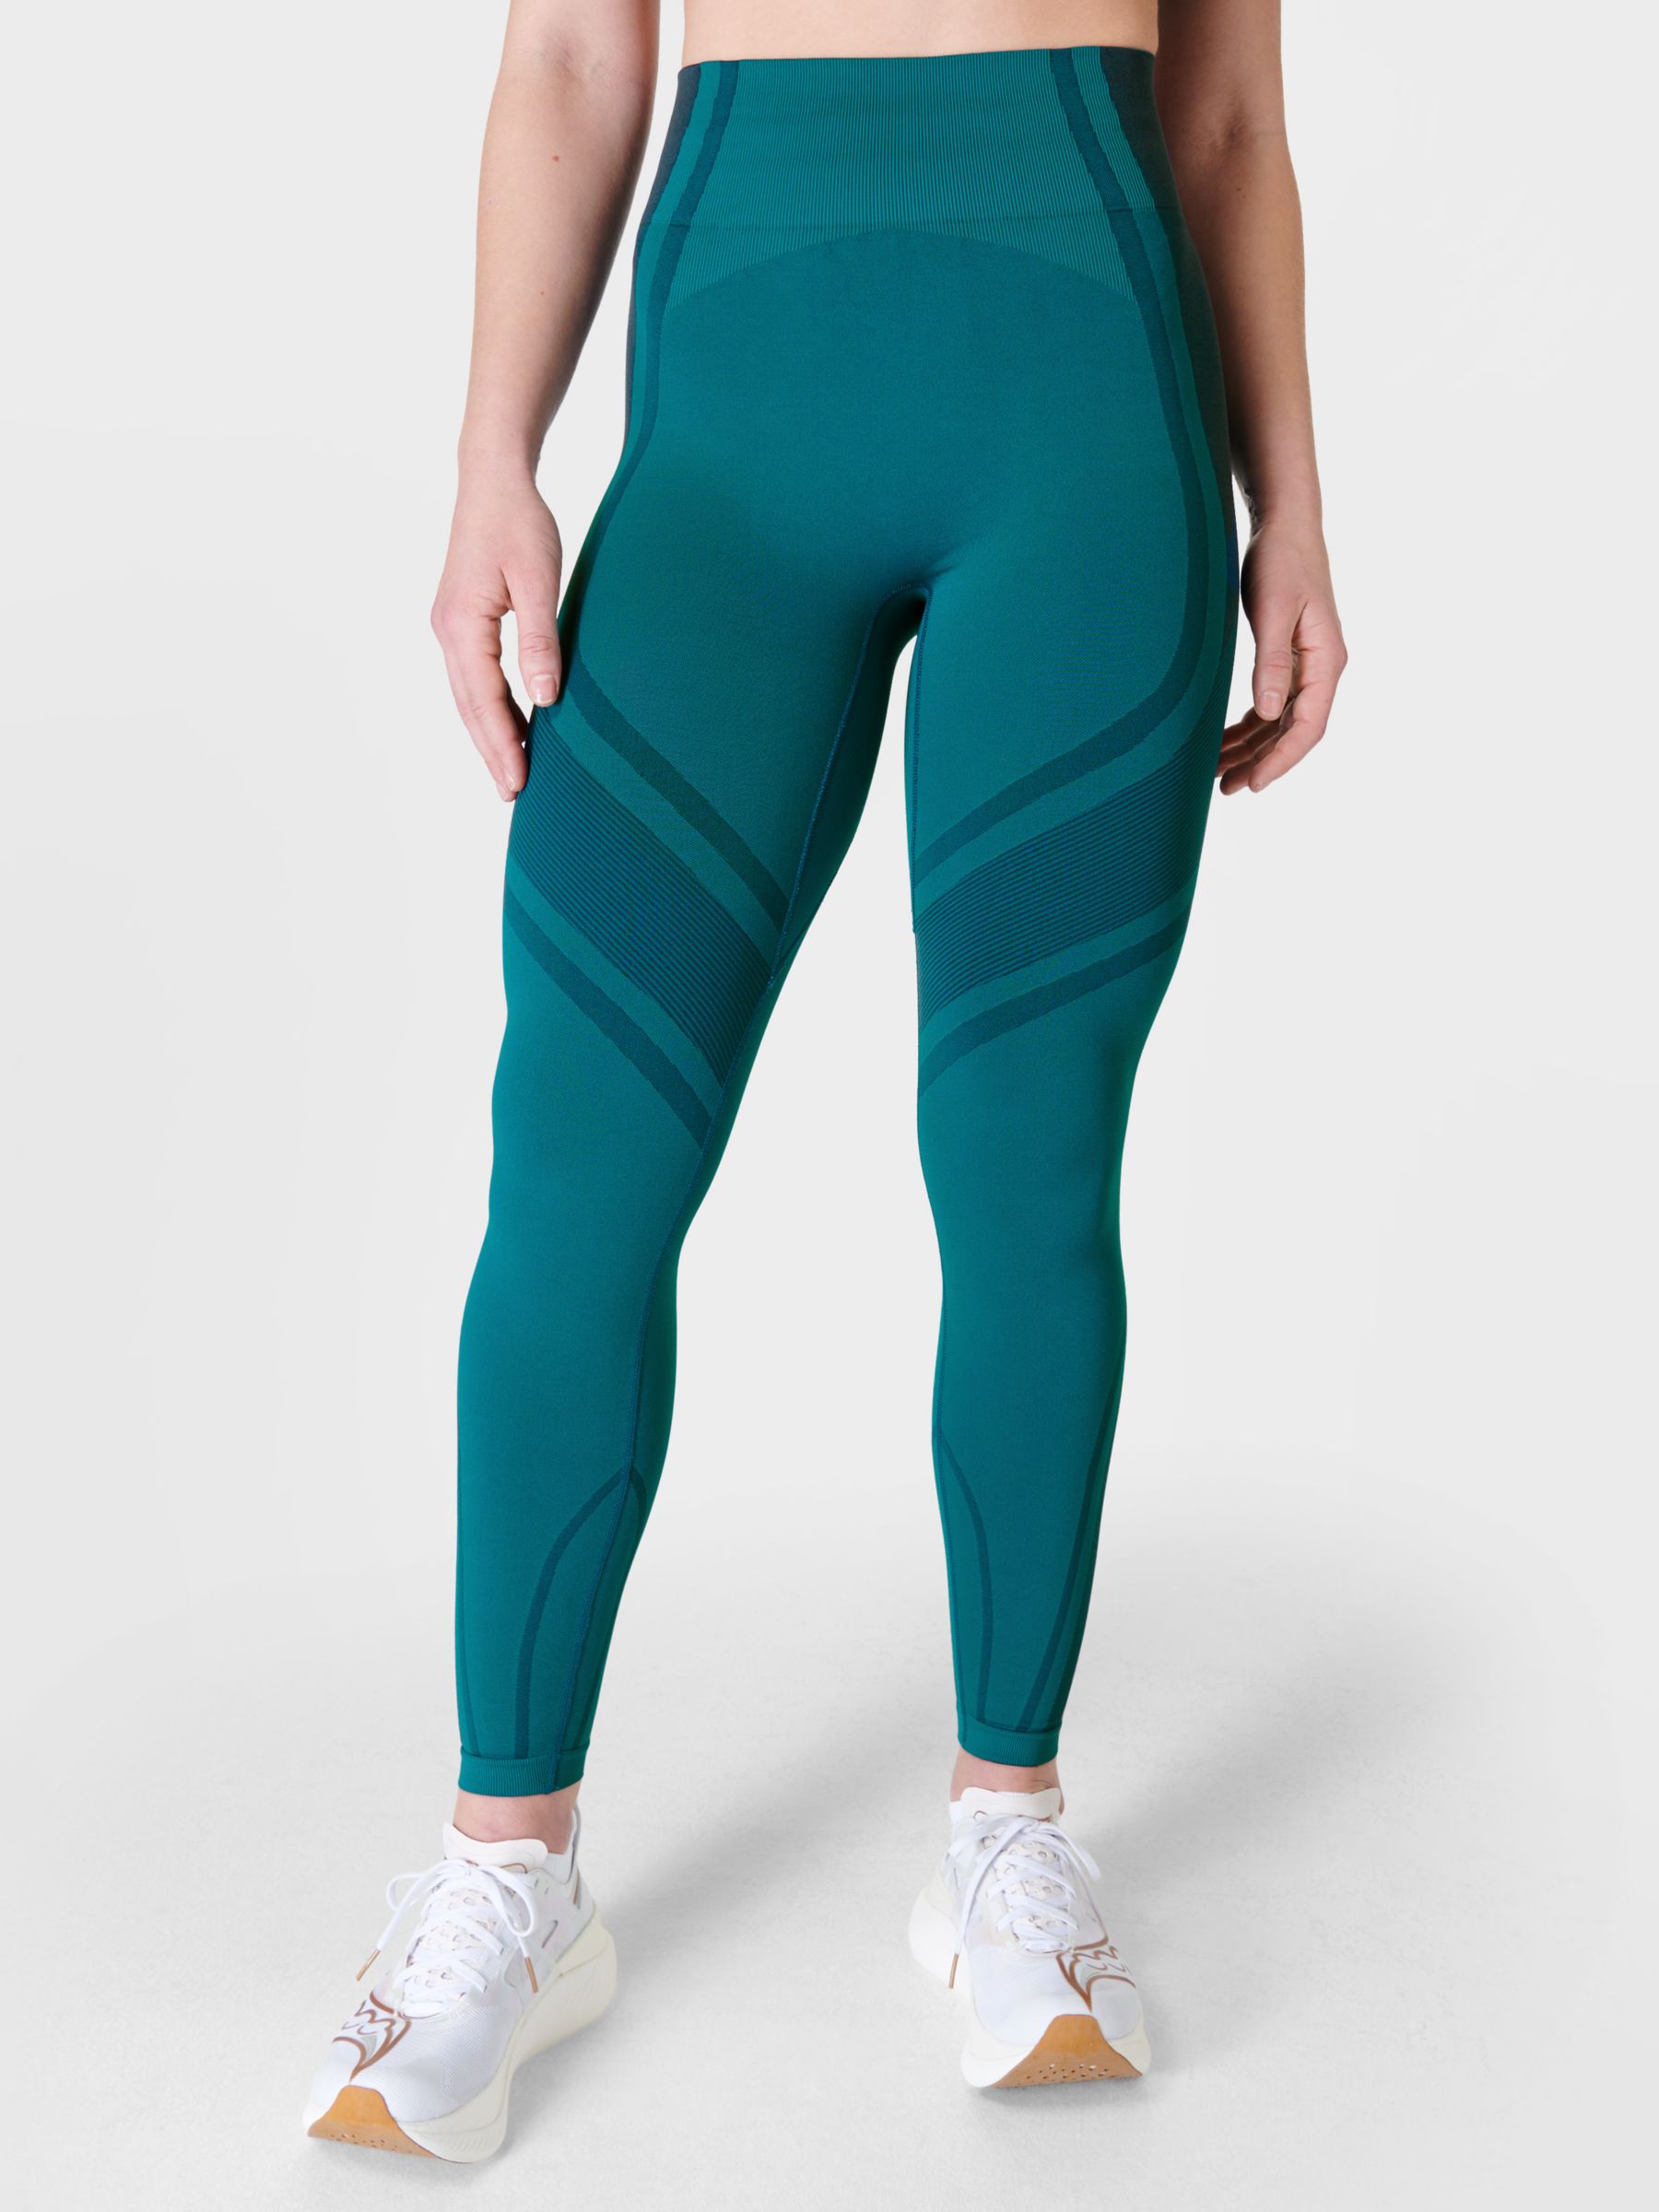 Gymshark fit seamless leggings -small  Clothes design, Outfit inspo, Seamless  leggings